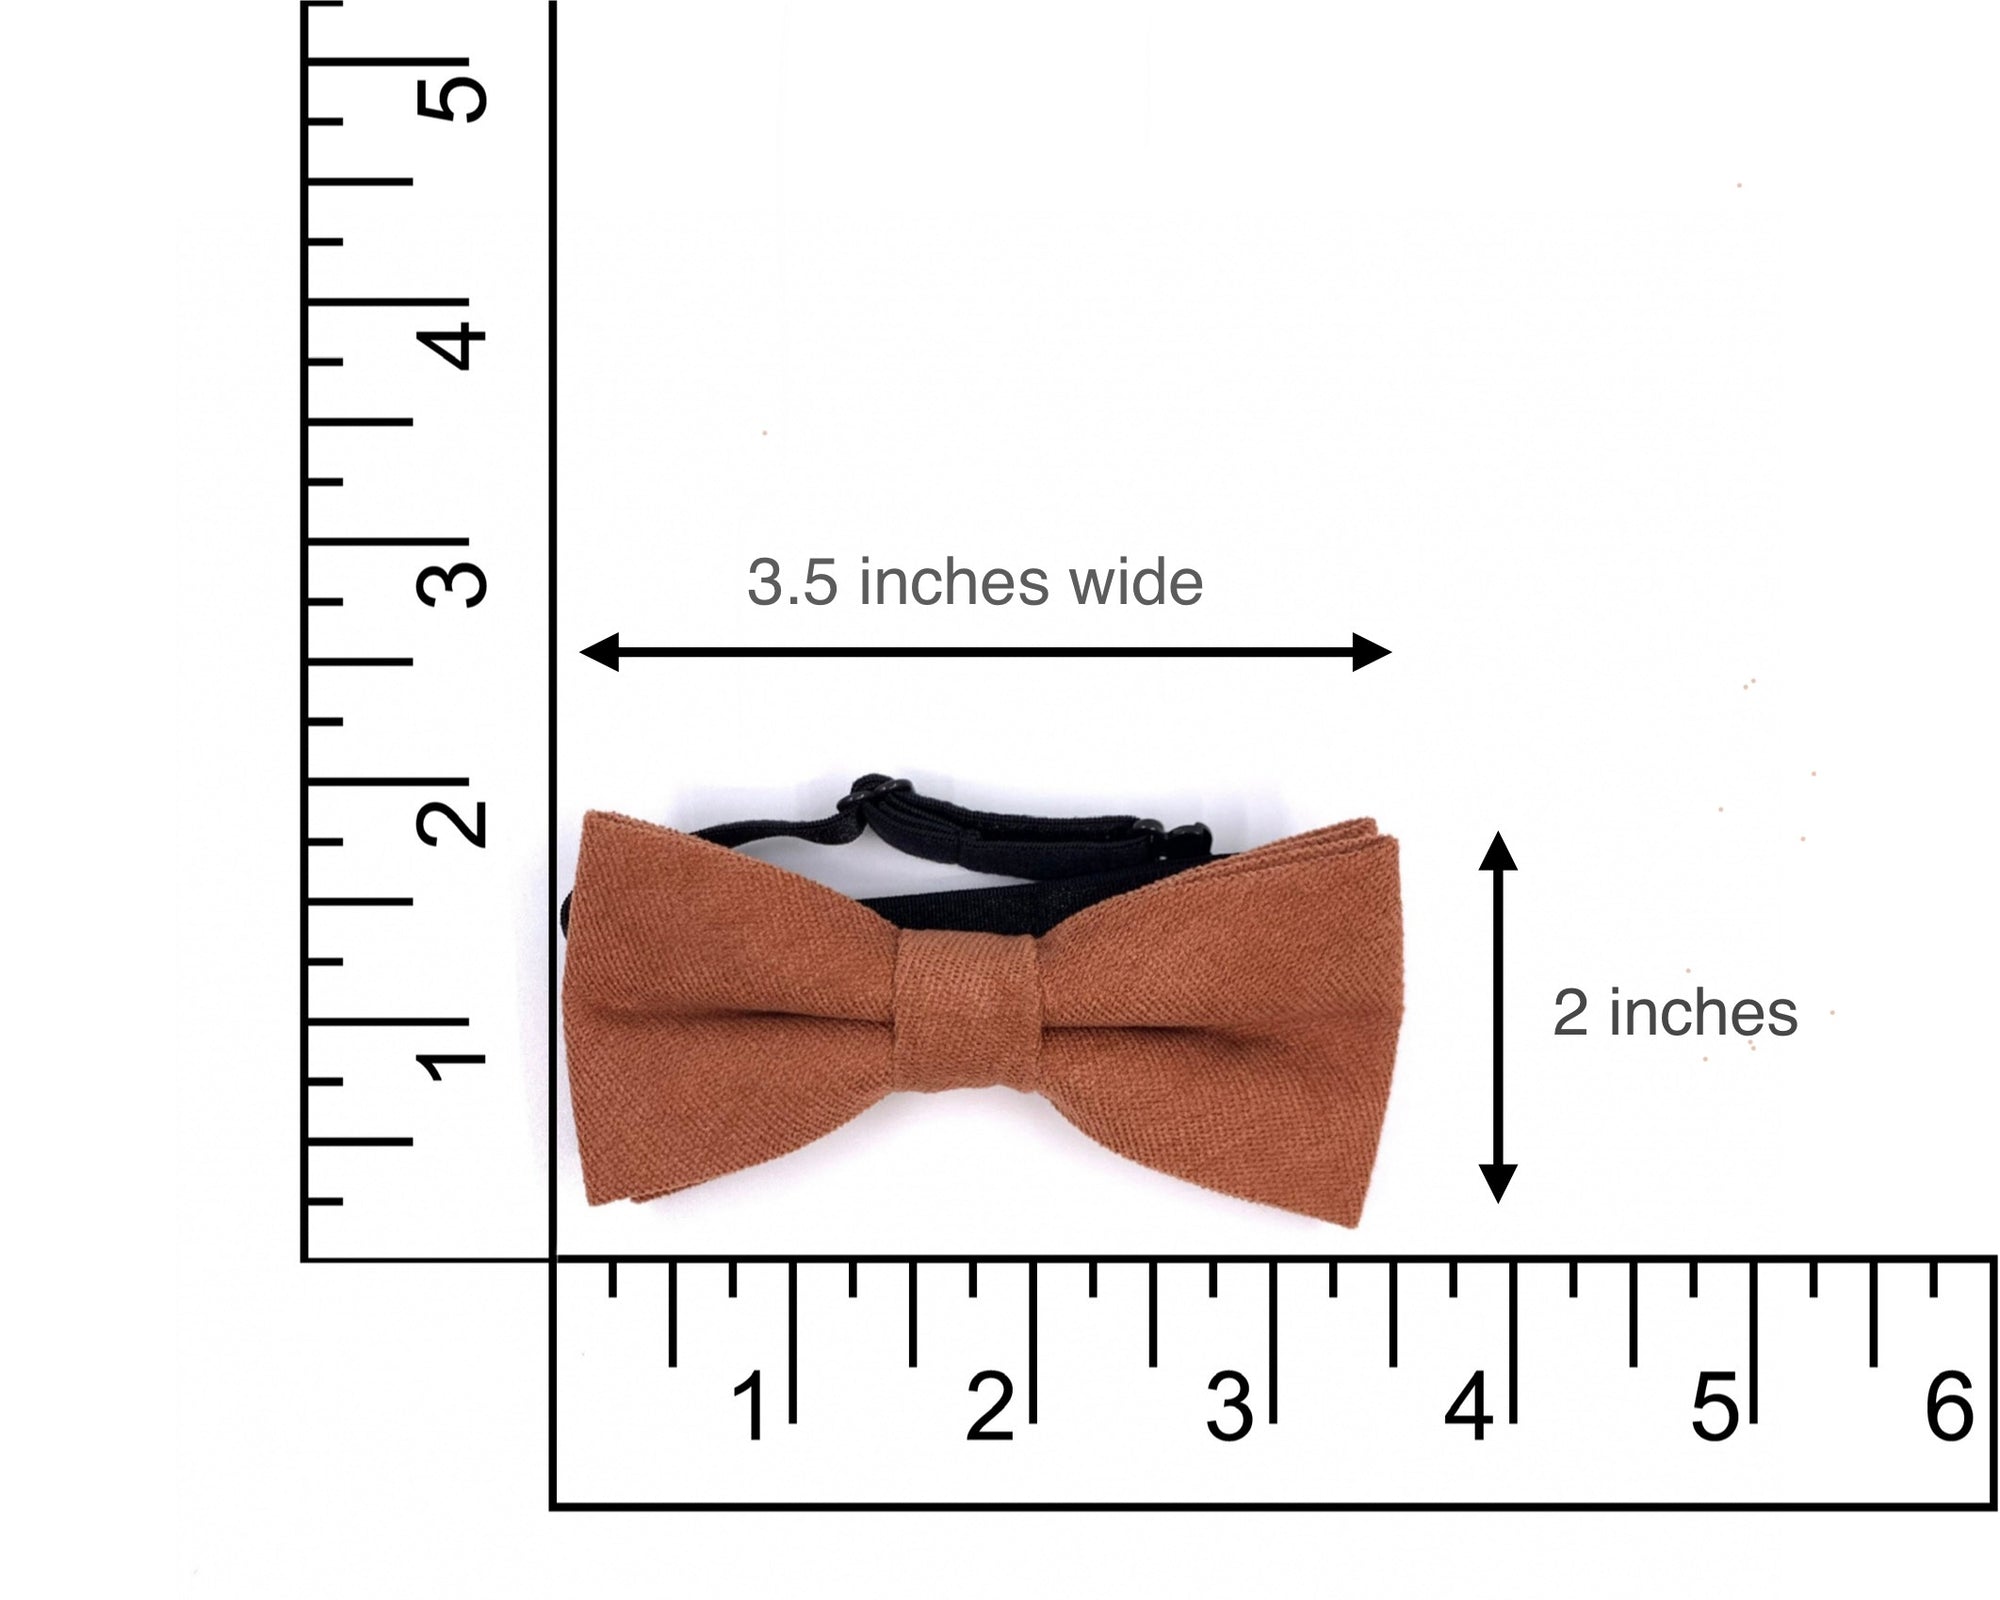 Terracotta Bow tie for Kids / Boys Pretied (AUTUMN)-Terracotta Pre Tied bow tie for children and toddlers. Baby Bow tie Bow Tie 10.5 * 6CMfor toddlers Bow tie comes pretied with strechable strap on the back Color: Terracotta Great for Ring Bearer Dinners Photo shoots Photo sessions Weddings Terracotta Bow tie for Babies Terracotta Bow tie for kids for weddings and events. Great anniversary present and gift. Also great gift for the groom and his groomsmen to wear at the wedding, and don’t forget 